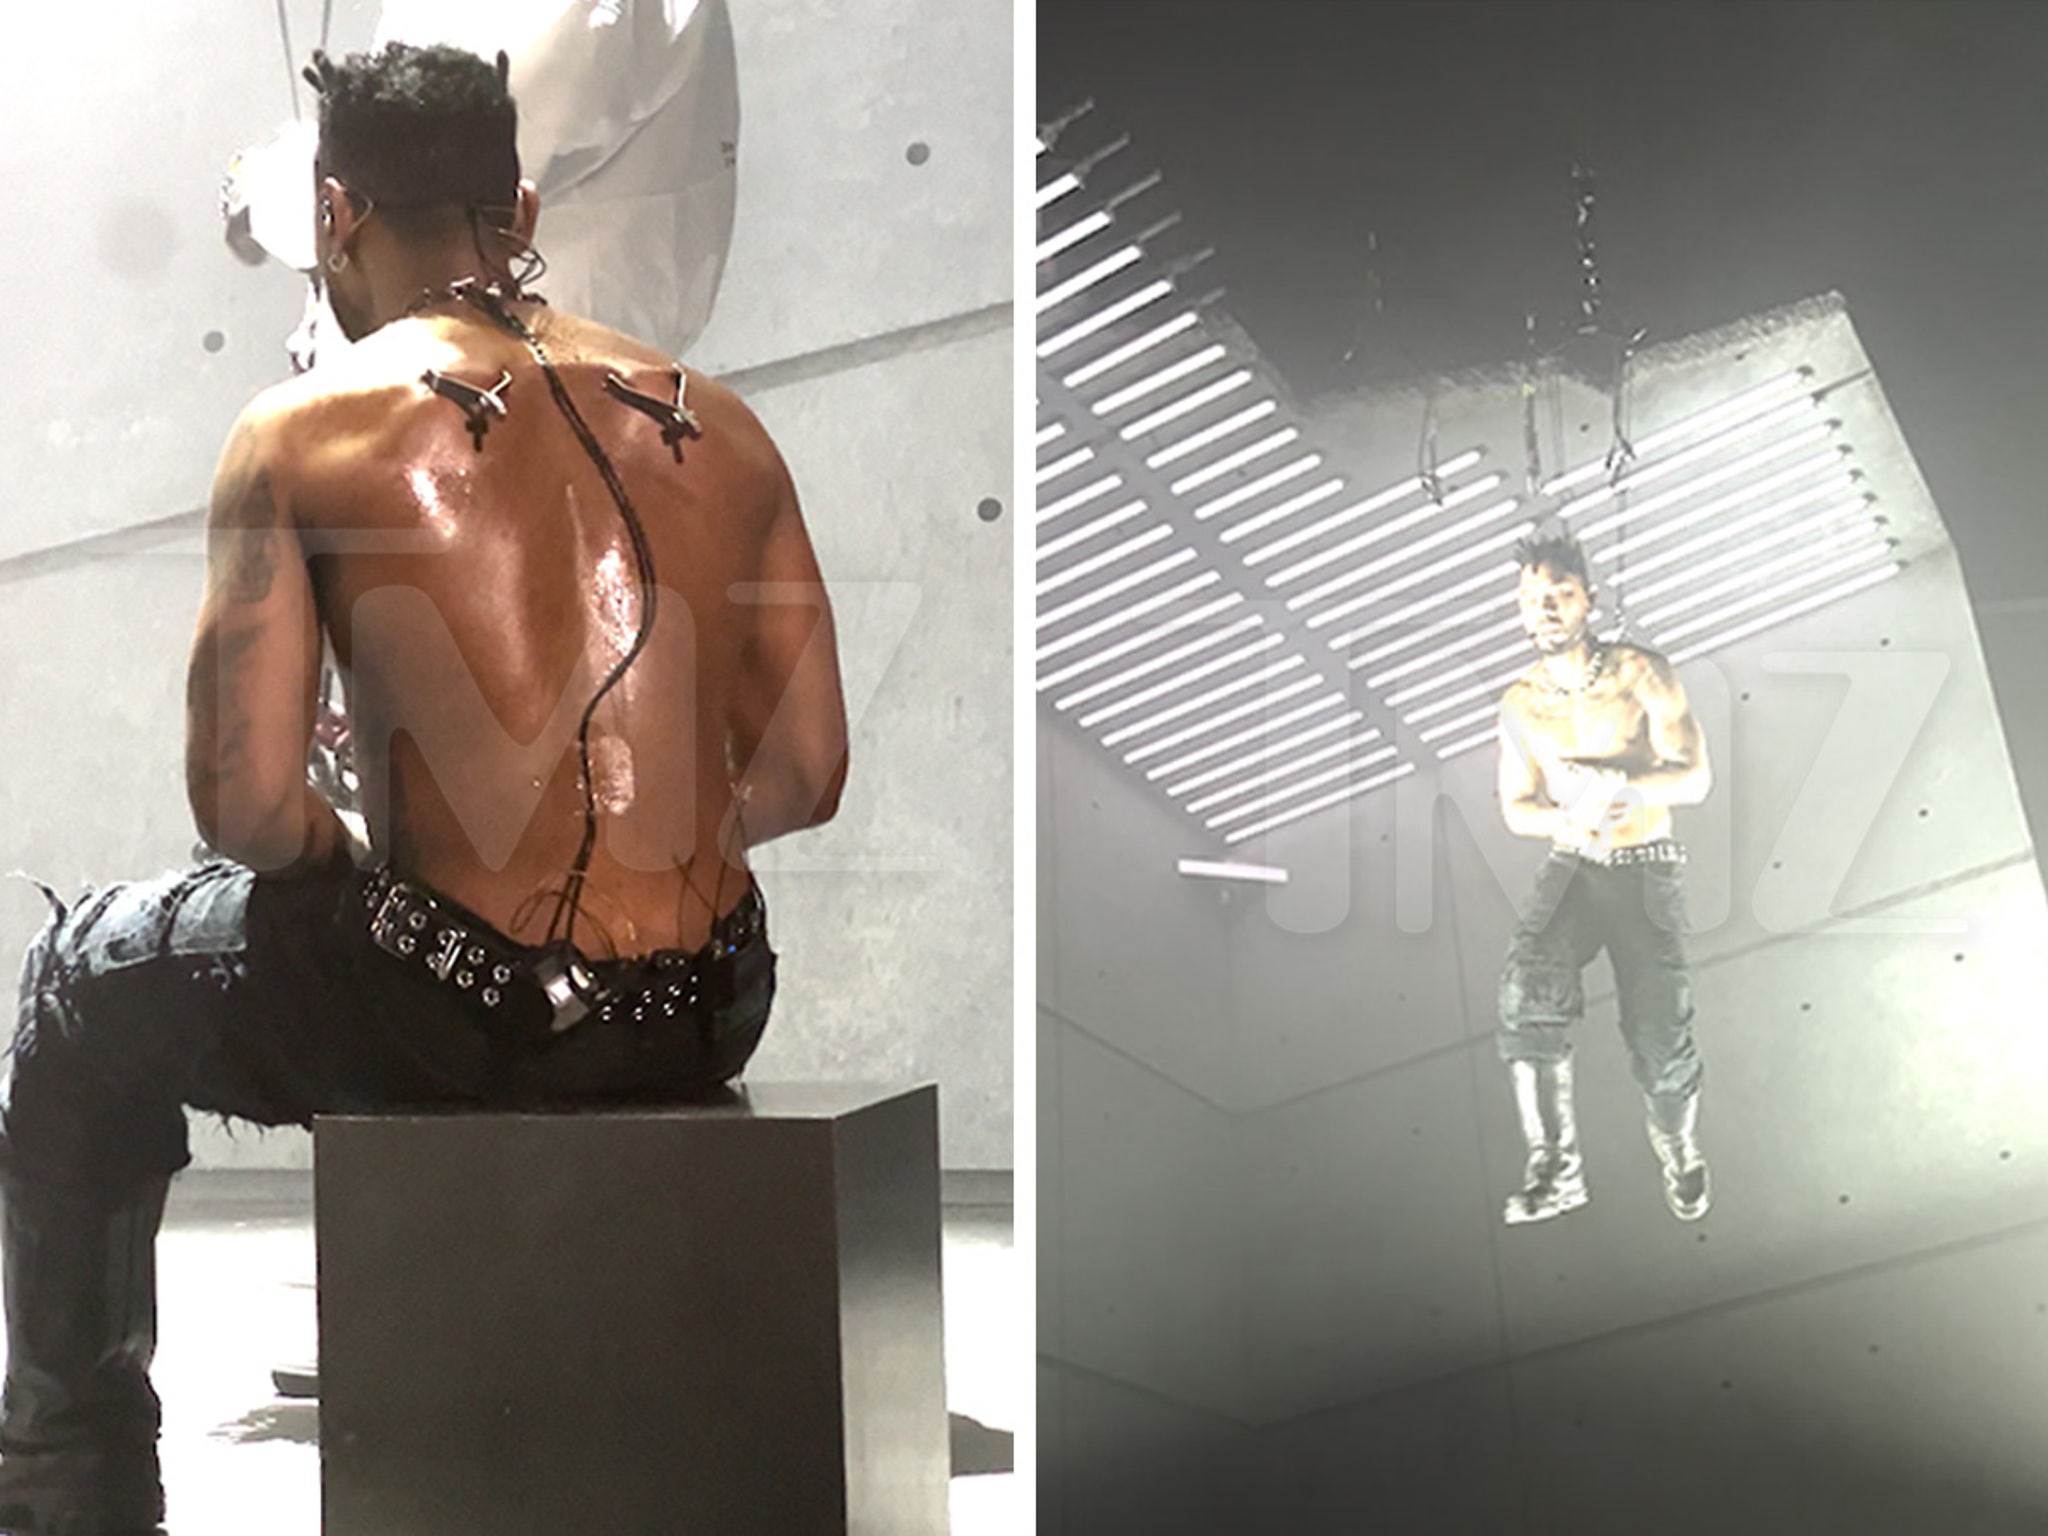 Miguel Performs Gruesome Body Suspension Show With Hooks In His Back